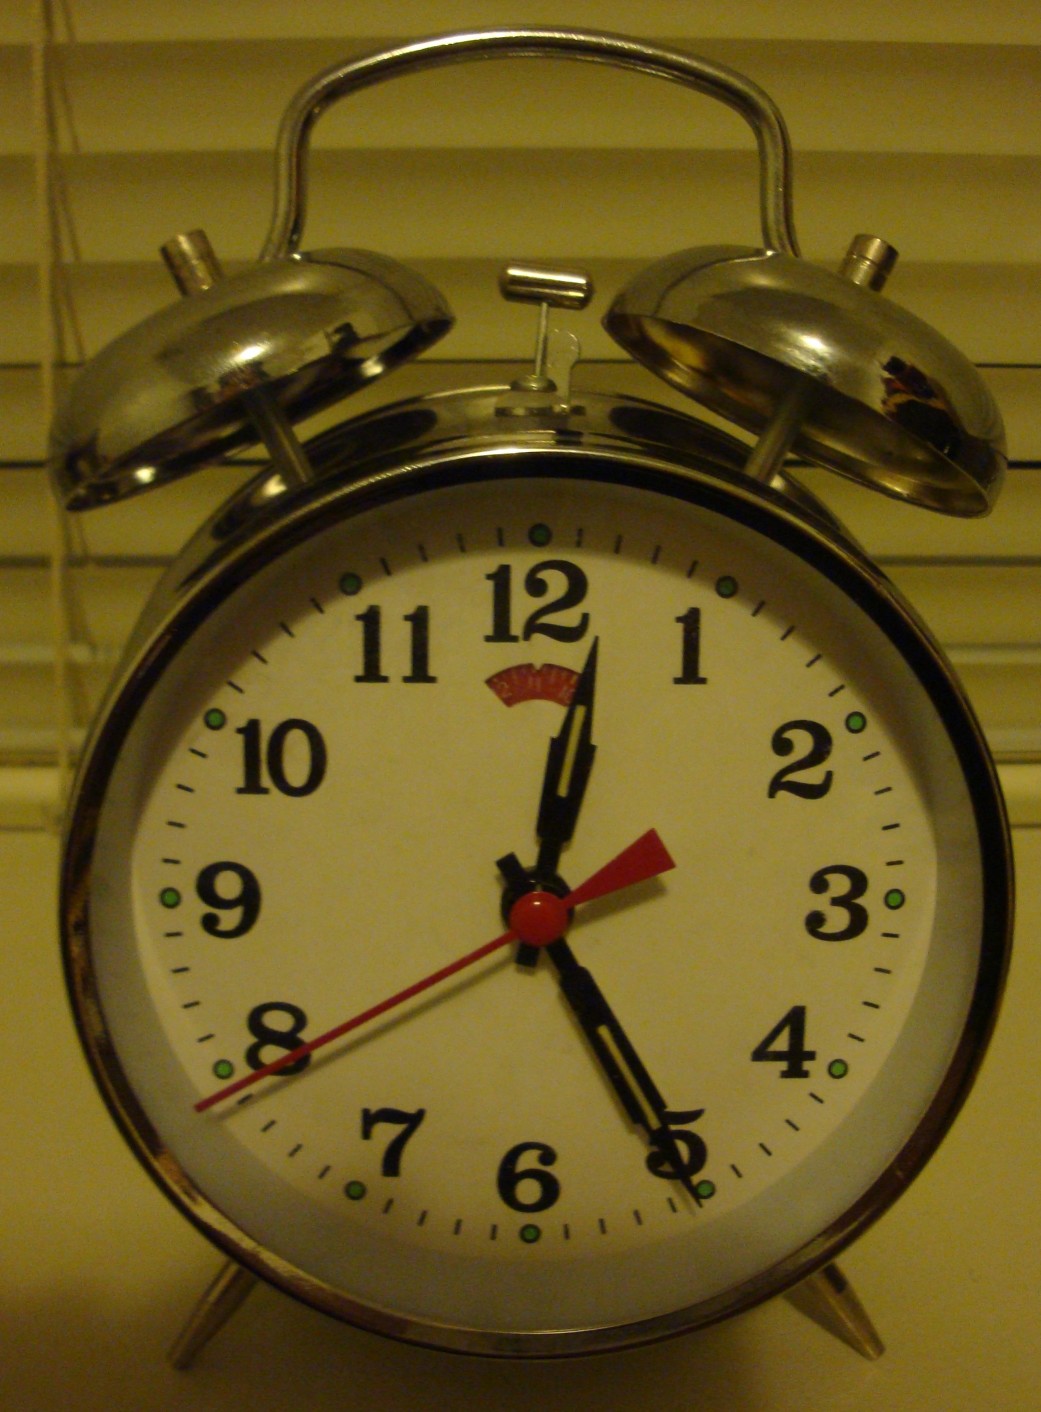 The new clock I decided to use from the front.